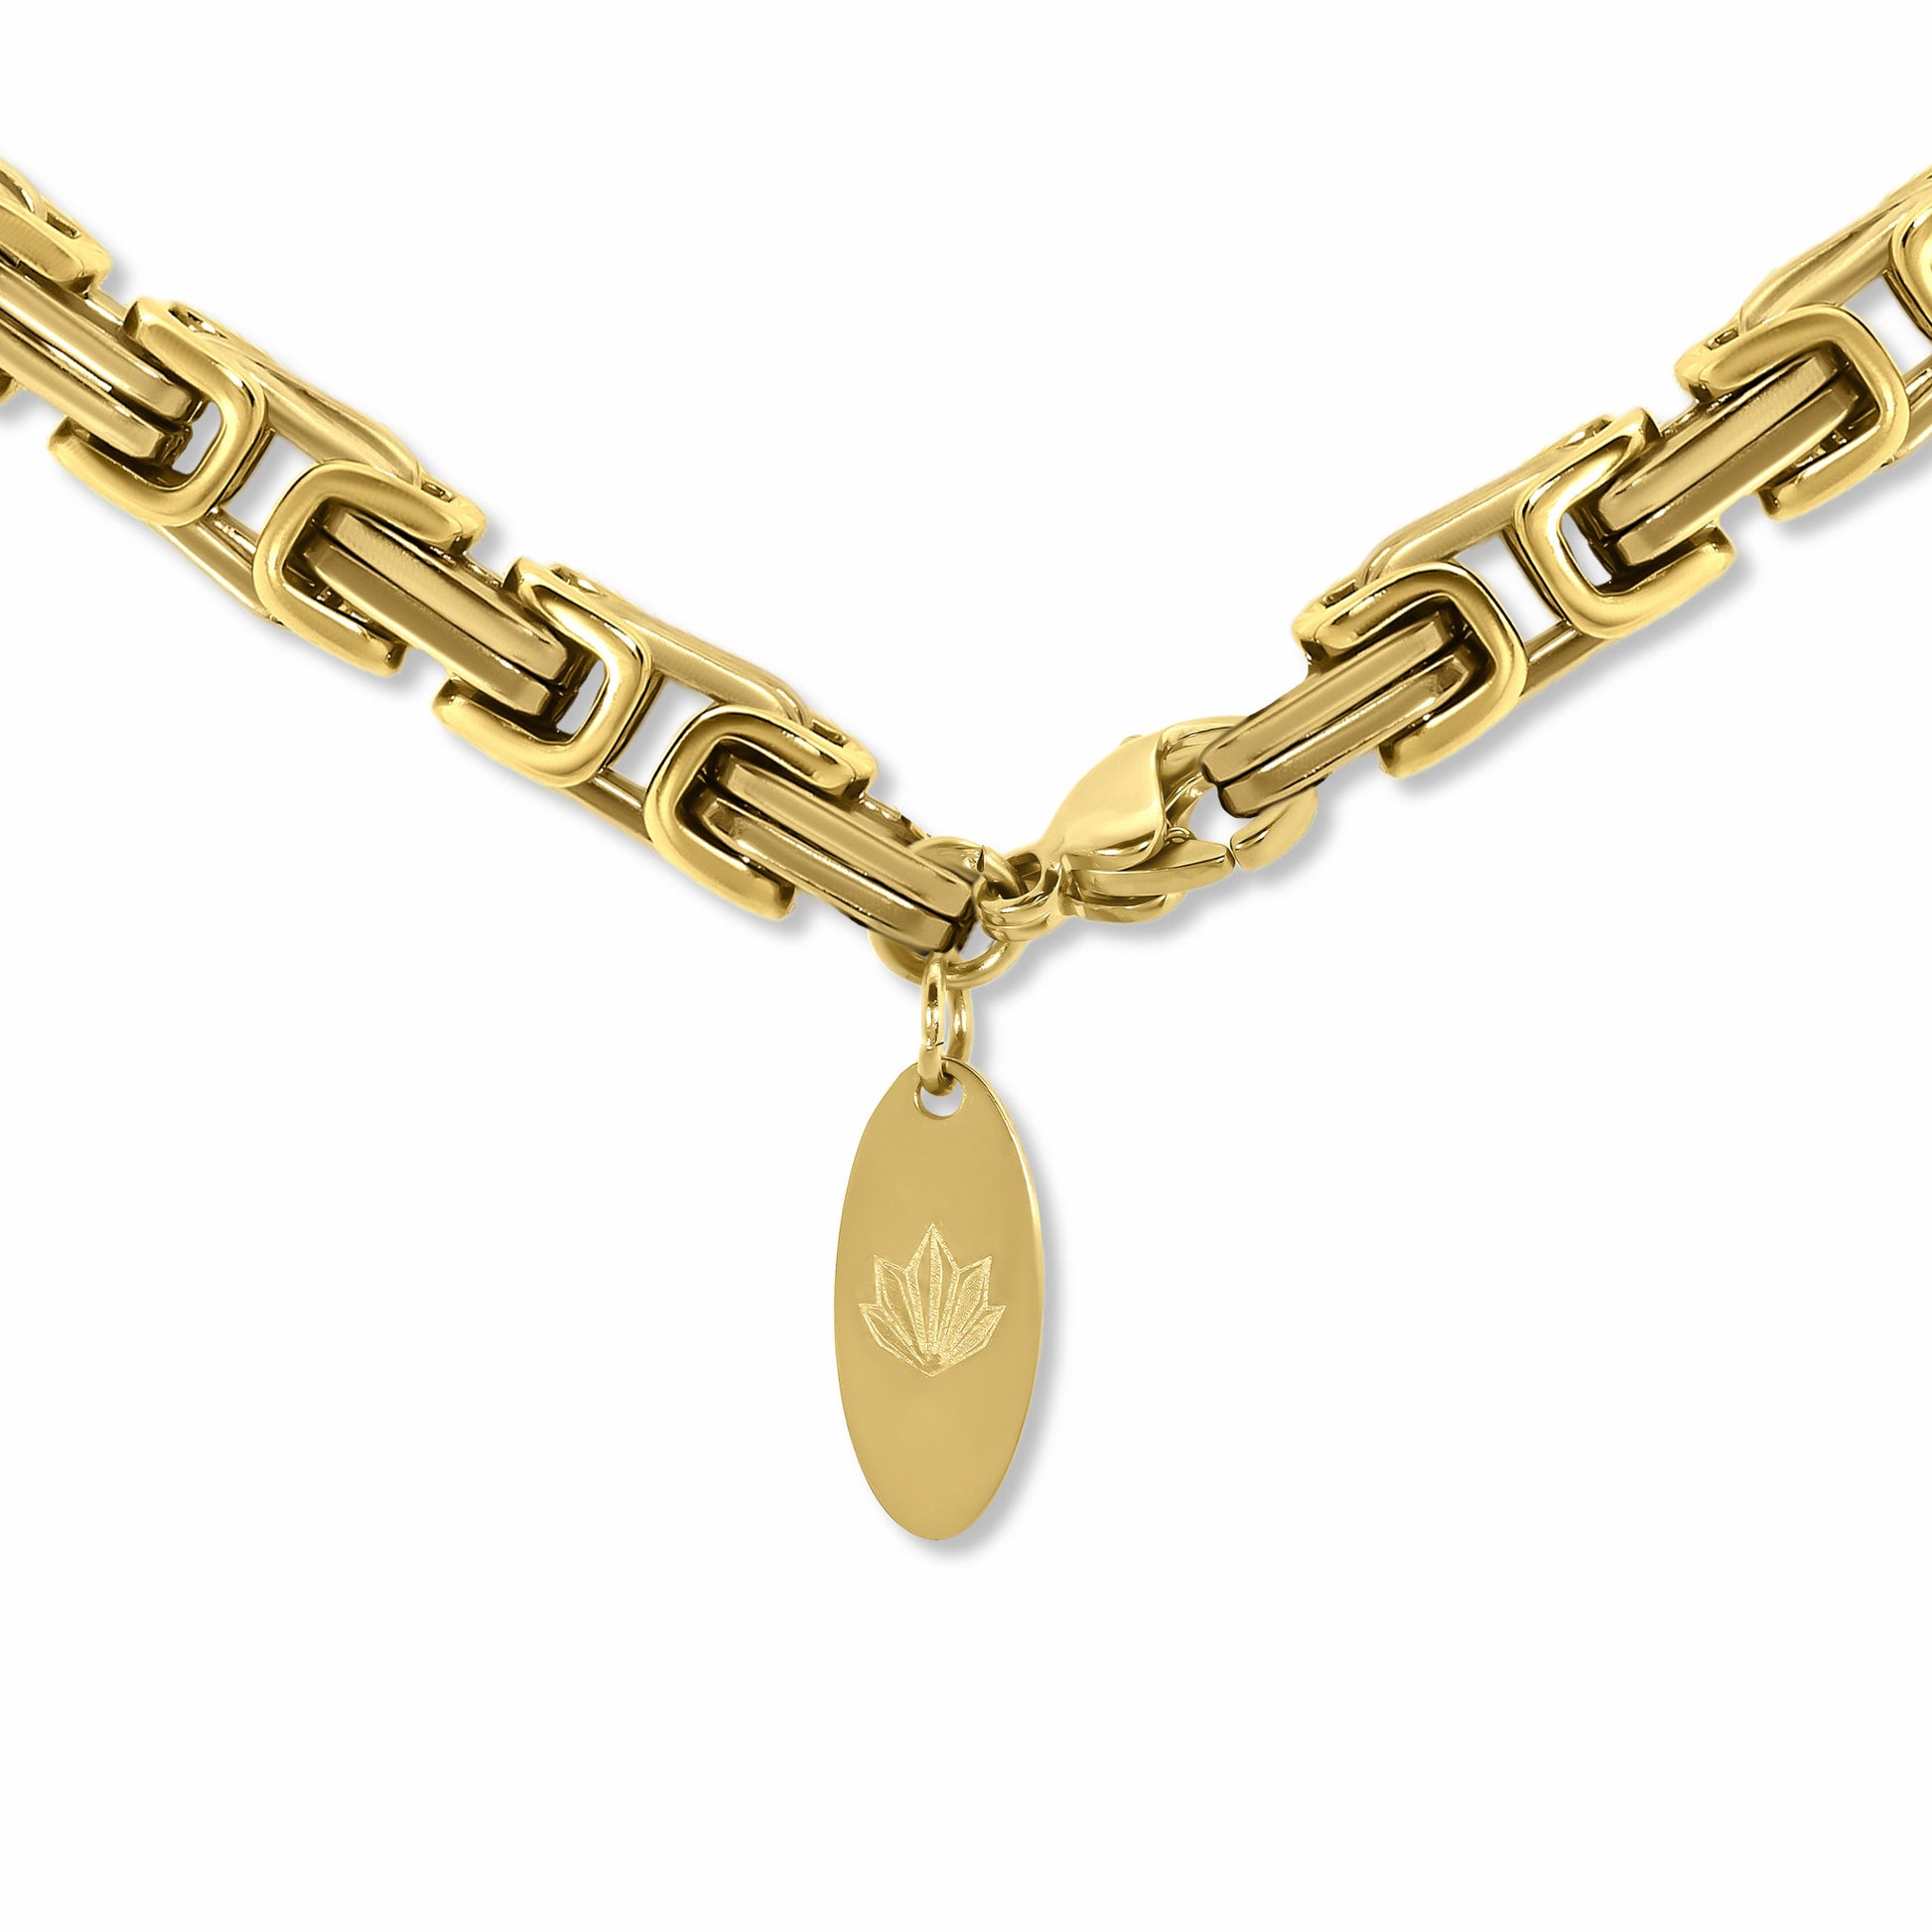 Byzantine Box Link Chain Gold 5mm clasp and brand logo tag on white background